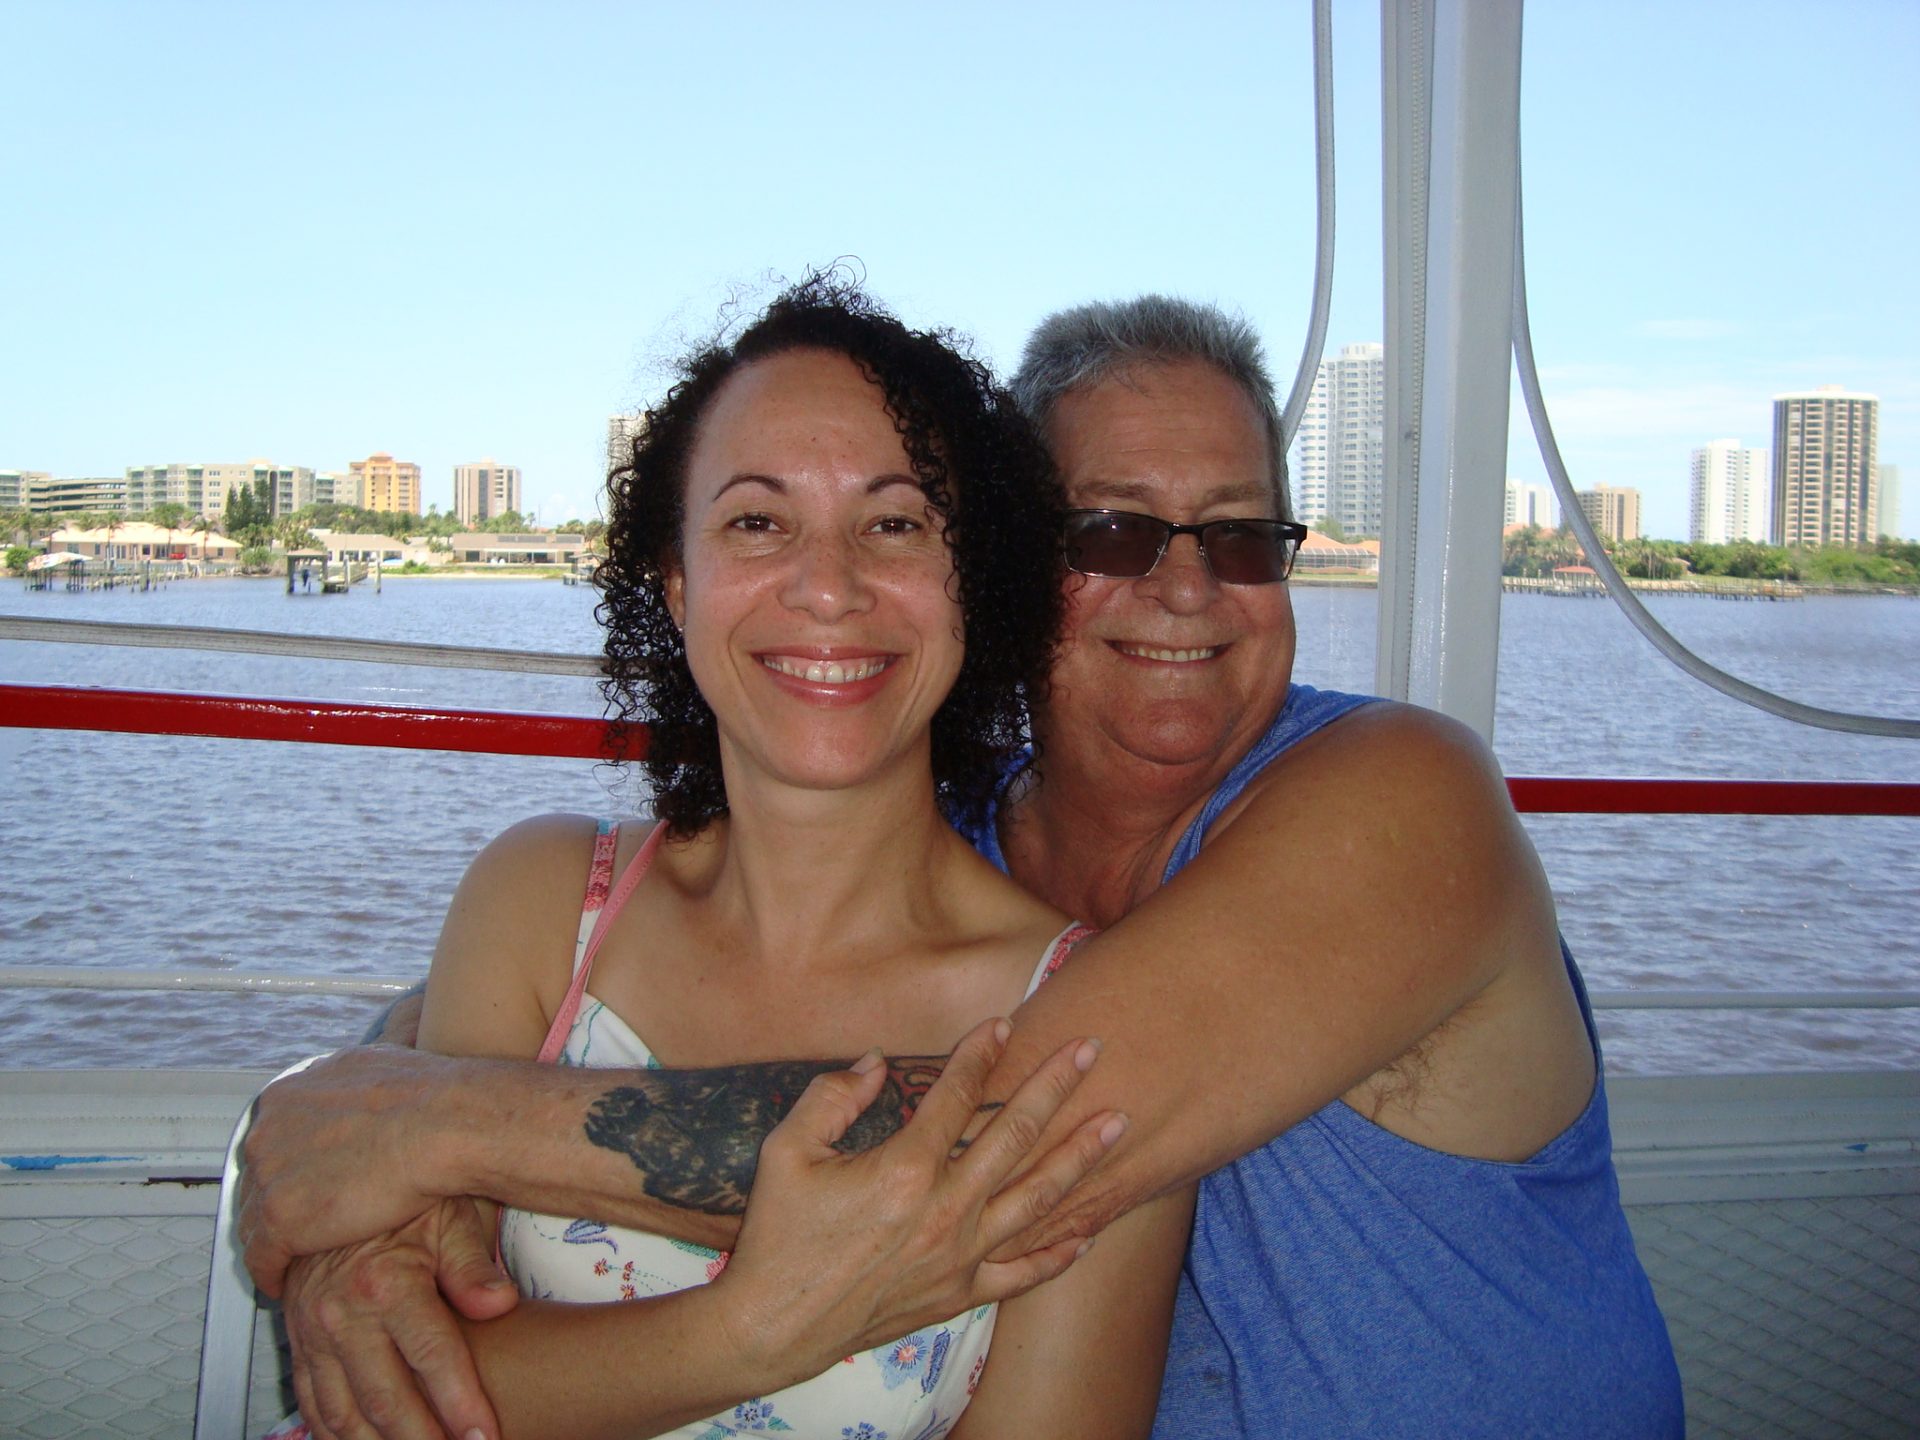 Roger (Pop) and Sheeah were on the Daytona Lady Dolphin Boat Ride and Dinner back in July 2018.